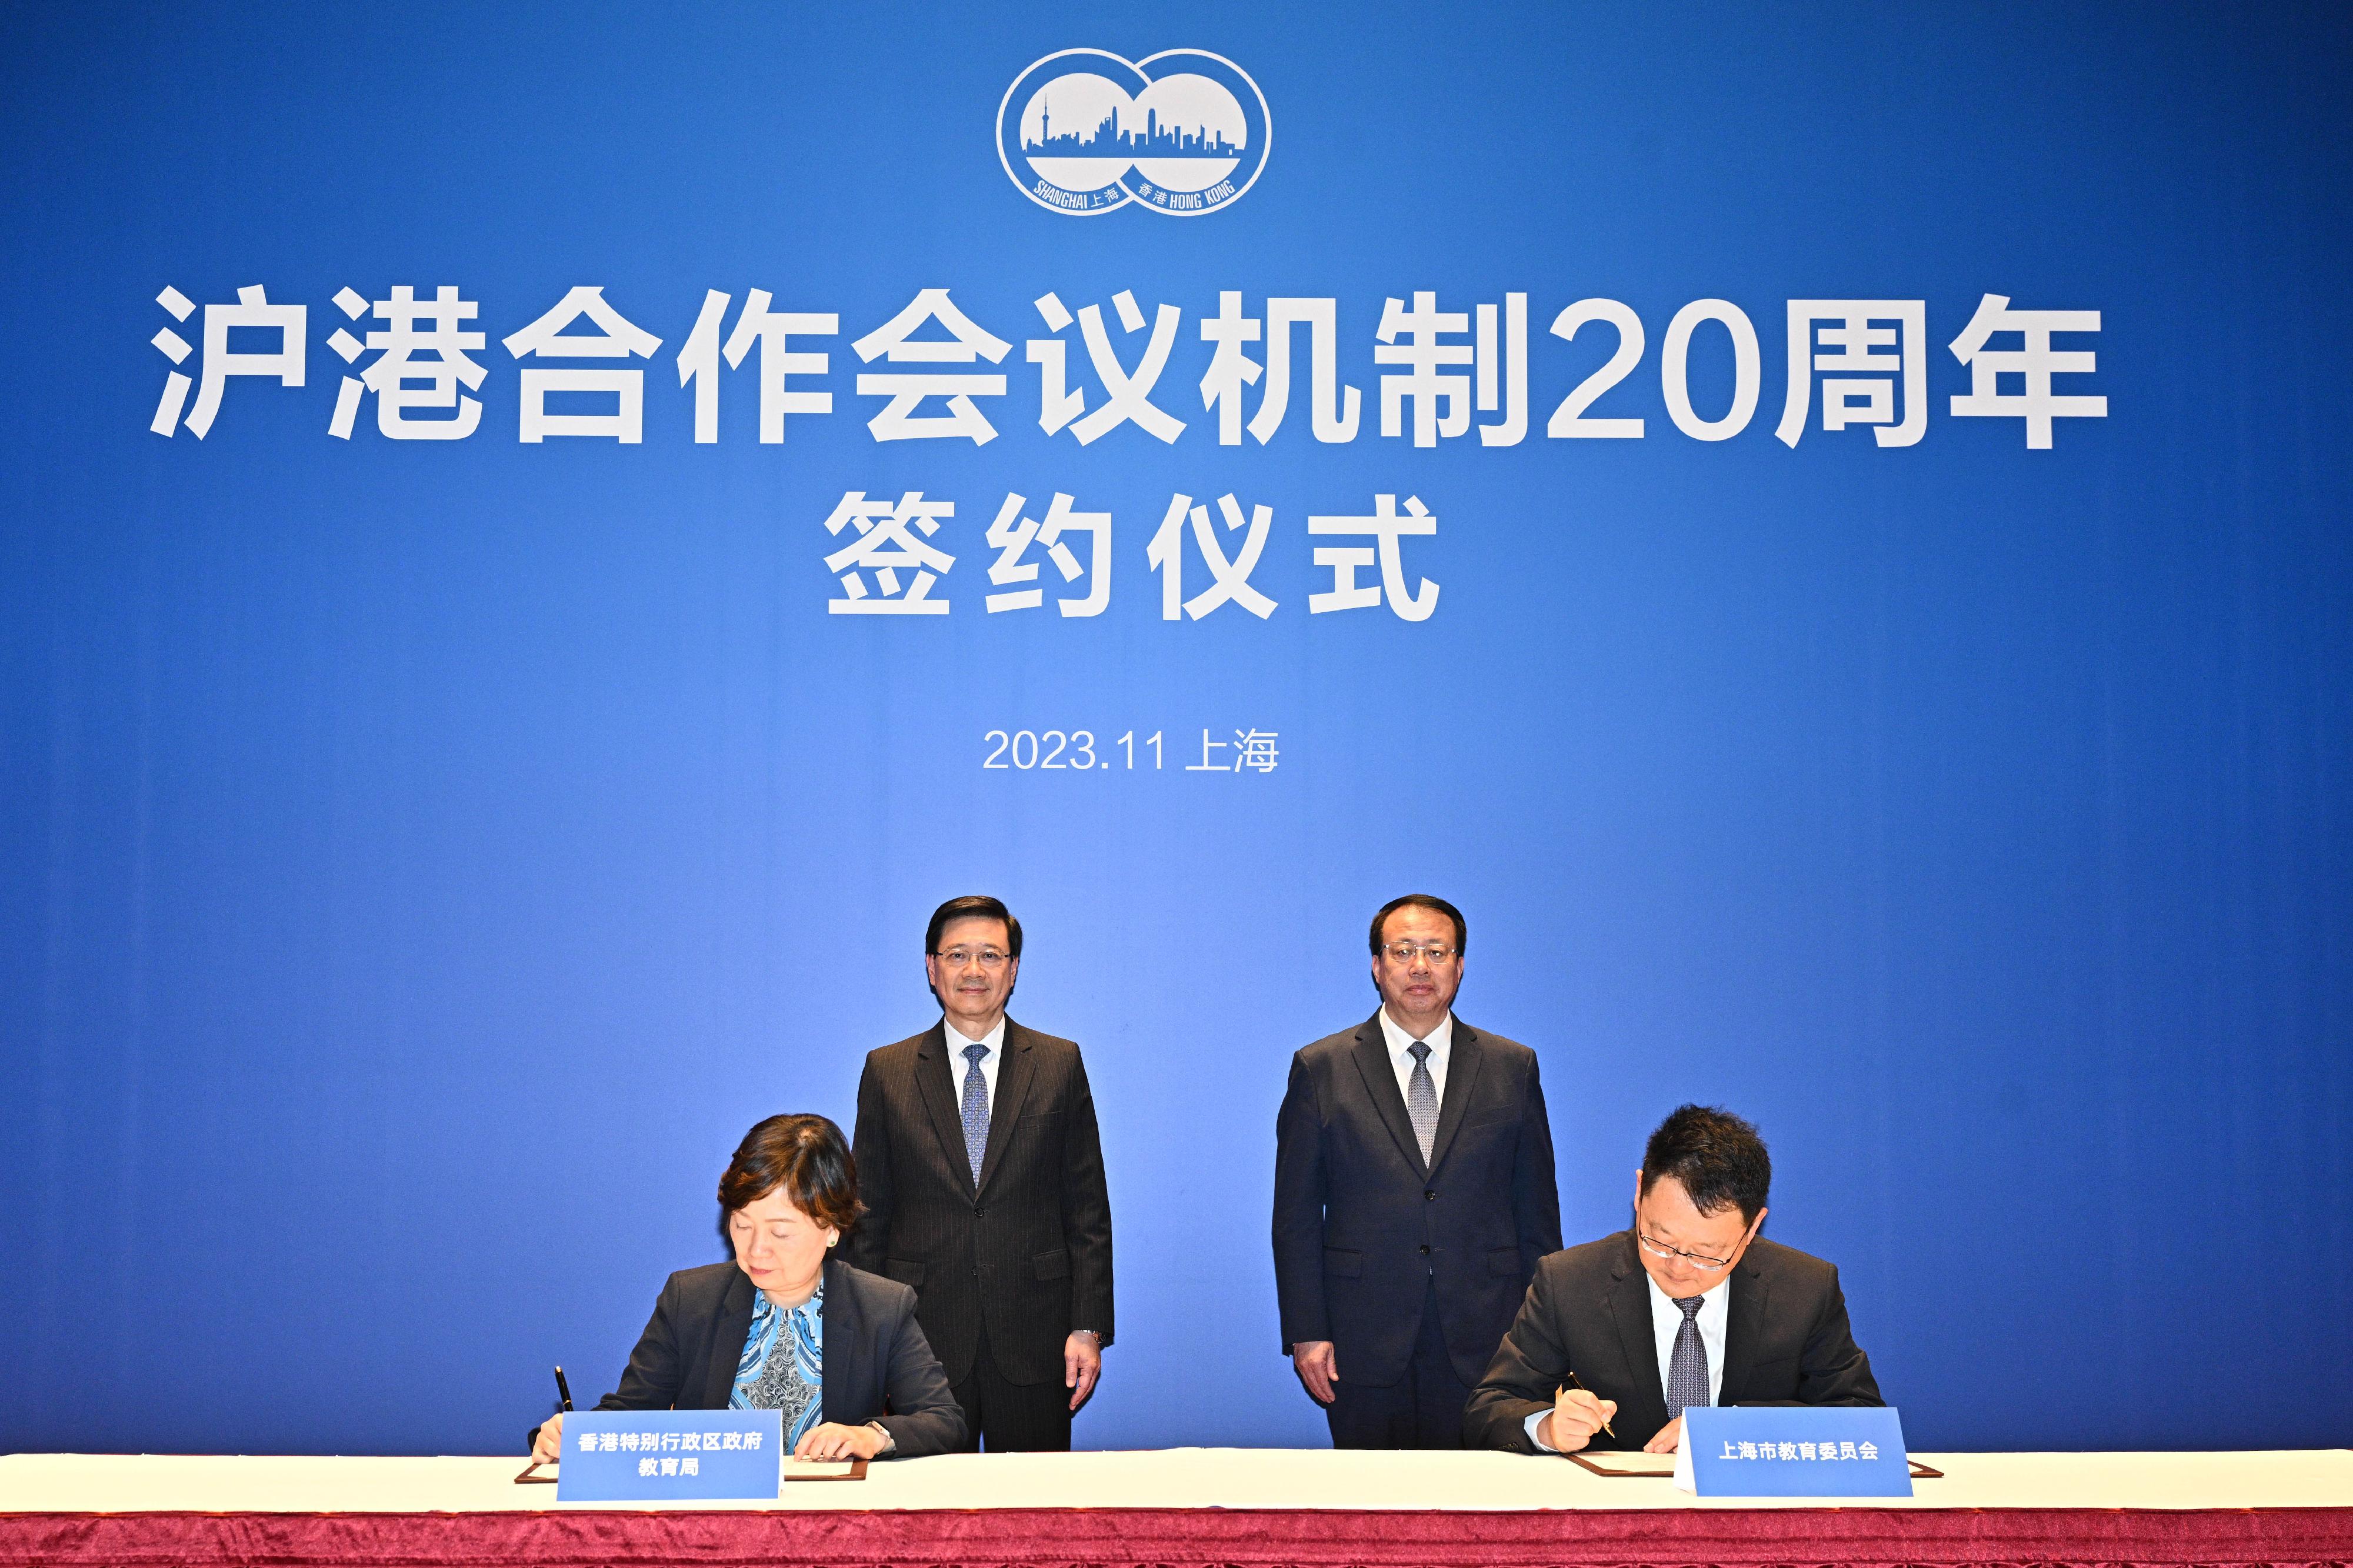 The Chief Executive, Mr John Lee, met with the Secretary of the CPC Shanghai Municipal Committee, Mr Chen Jining, and the Mayor of Shanghai, Mr Gong Zheng, in Shanghai today (November 4). Photo shows Mr Lee (back row, left) and Mr Gong (back row, right) jointly witnessing the signing of co-operation agreements or memoranda of understanding between a government department and organisations of the two places in areas including education, economy and trade, and arbitration after the meeting. 